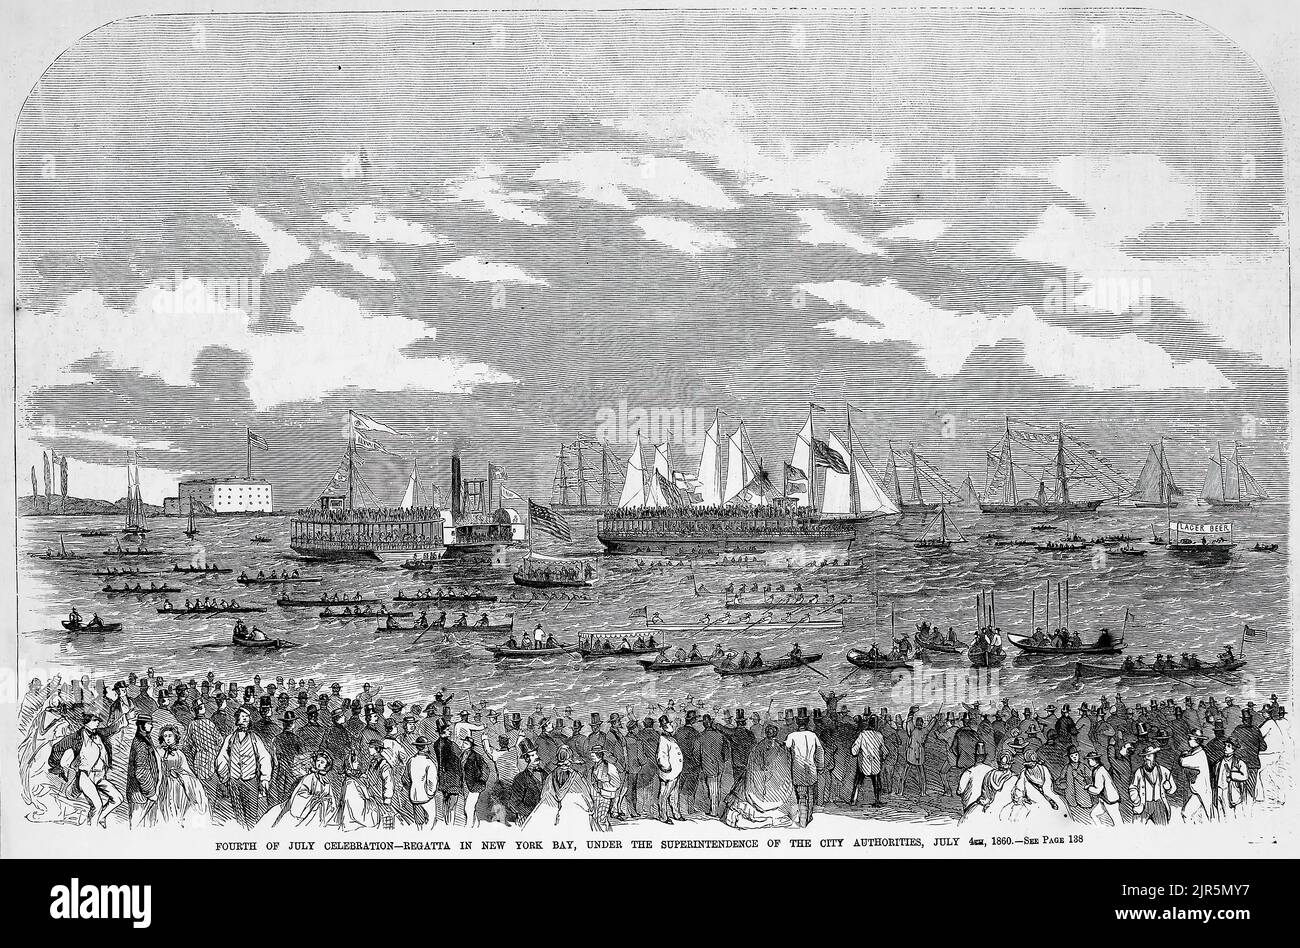 Fourth of July celebration - Regatta in New York Bay, under the superintendence of the city authorities, July 4th, 1860. 19th century illustration from Frank Leslie's Illustrated Newspaper Stock Photo